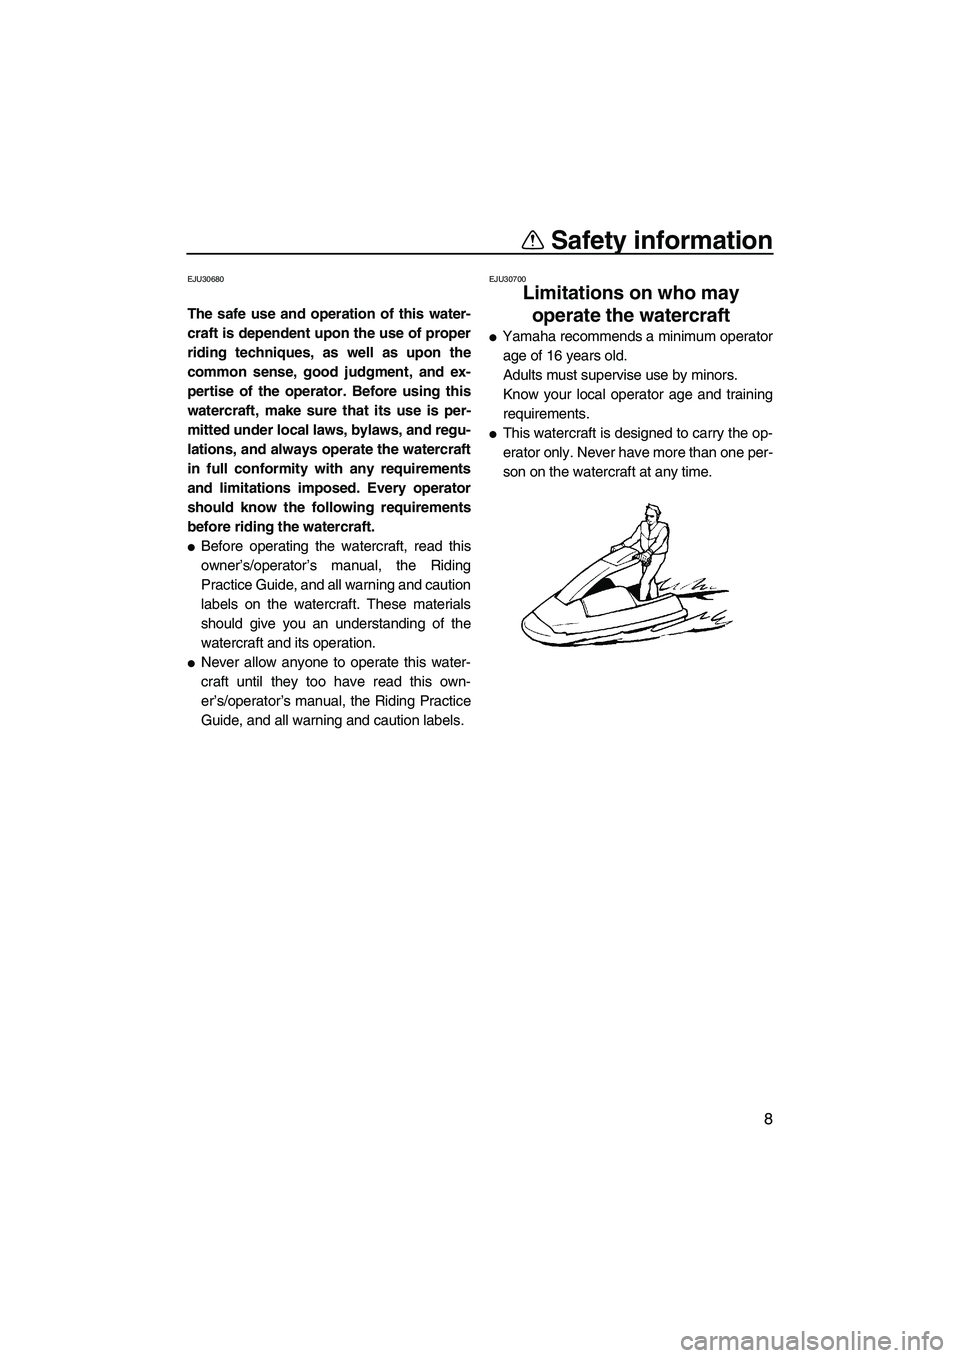 YAMAHA SUPERJET 2007 User Guide Safety information
8
EJU30680
The safe use and operation of this water-
craft is dependent upon the use of proper
riding techniques, as well as upon the
common sense, good judgment, and ex-
pertise of